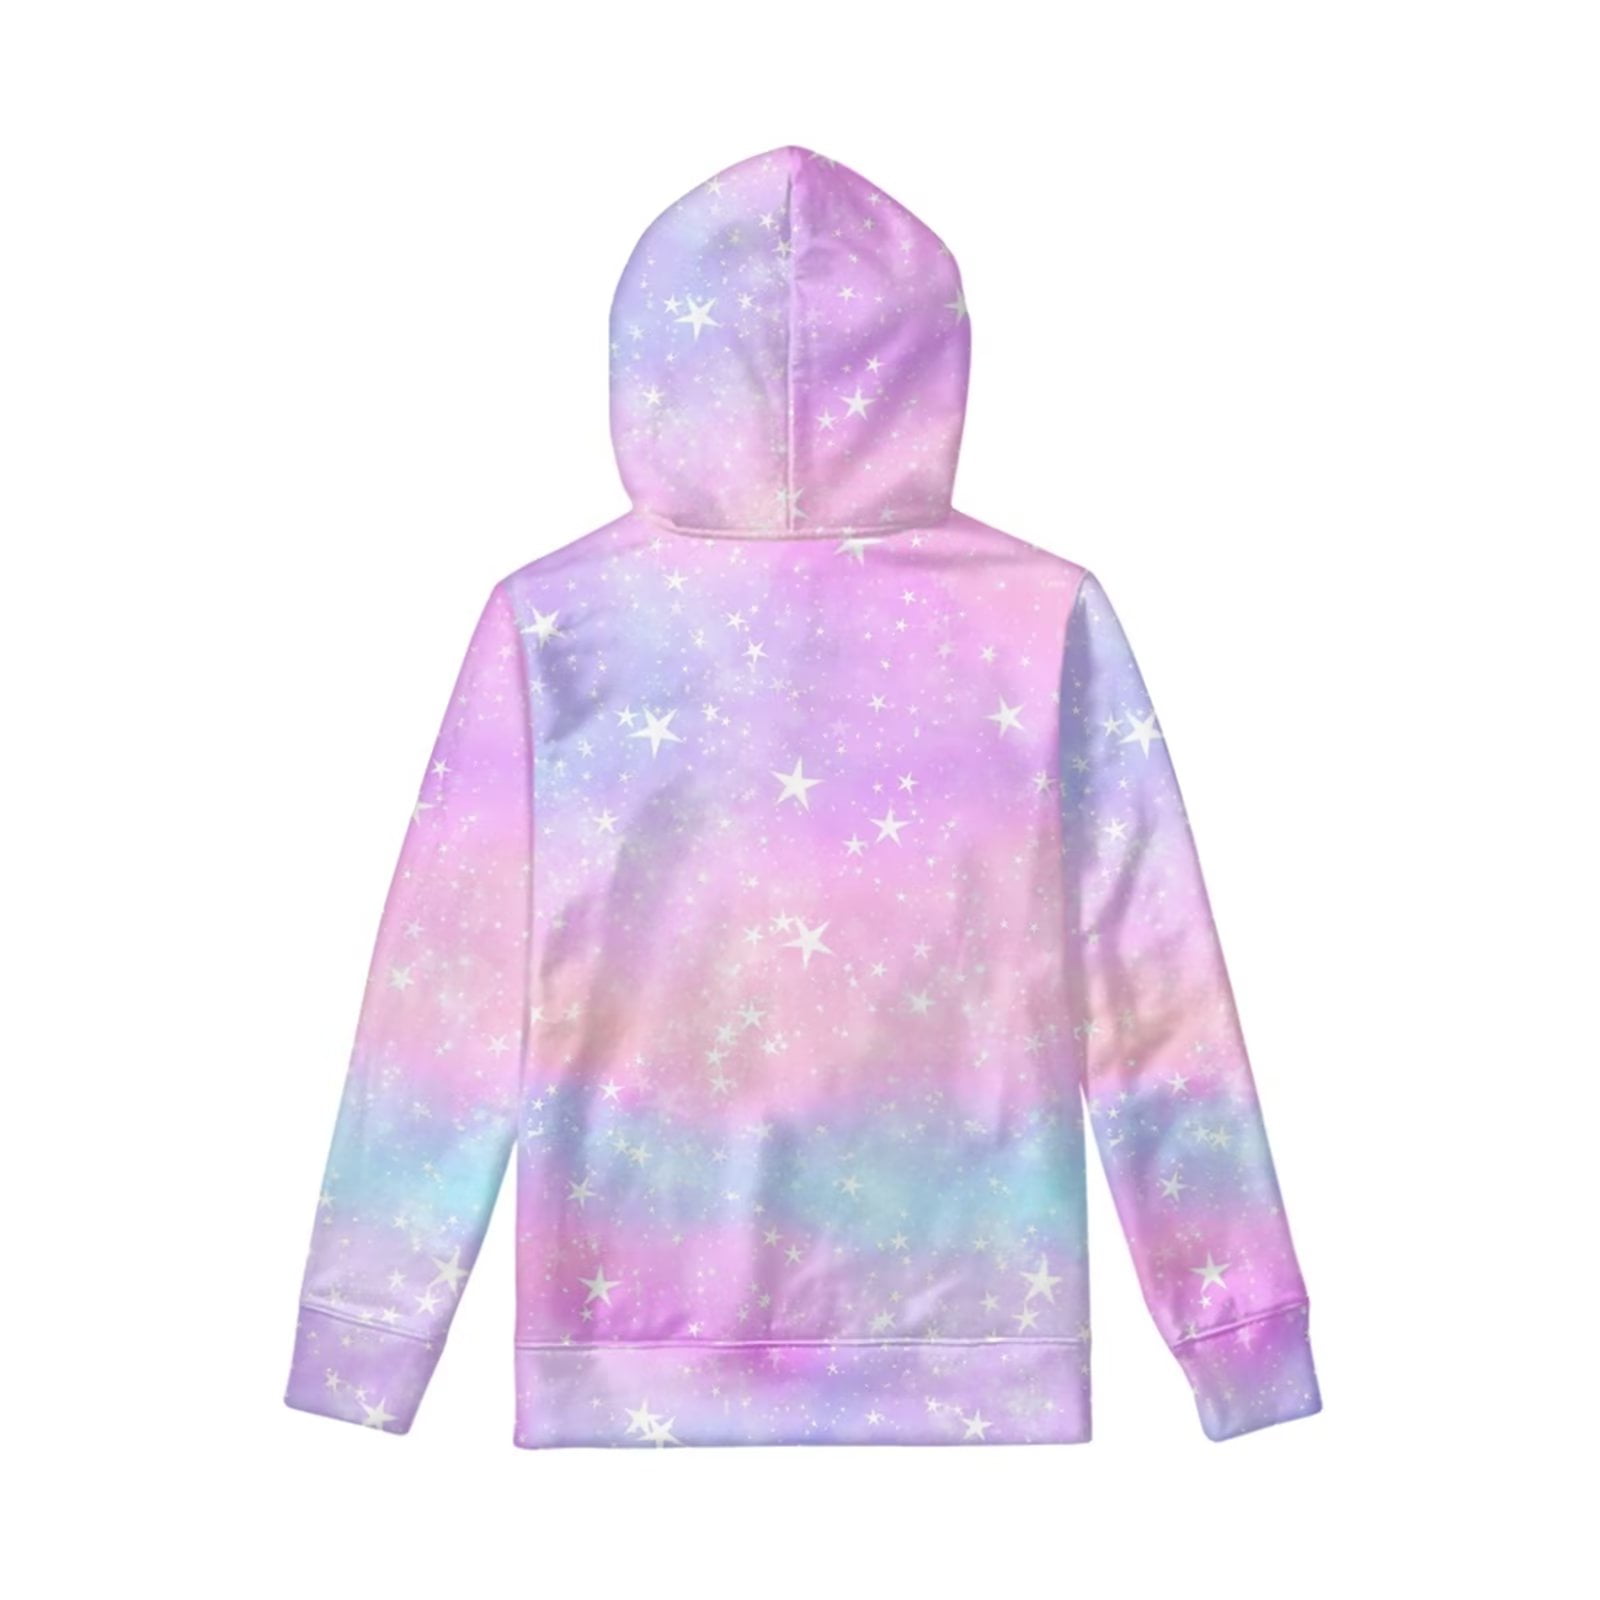 Play x Play Cardiff Boxy Hoodie - Periwinkle – Dreams of Cuteness